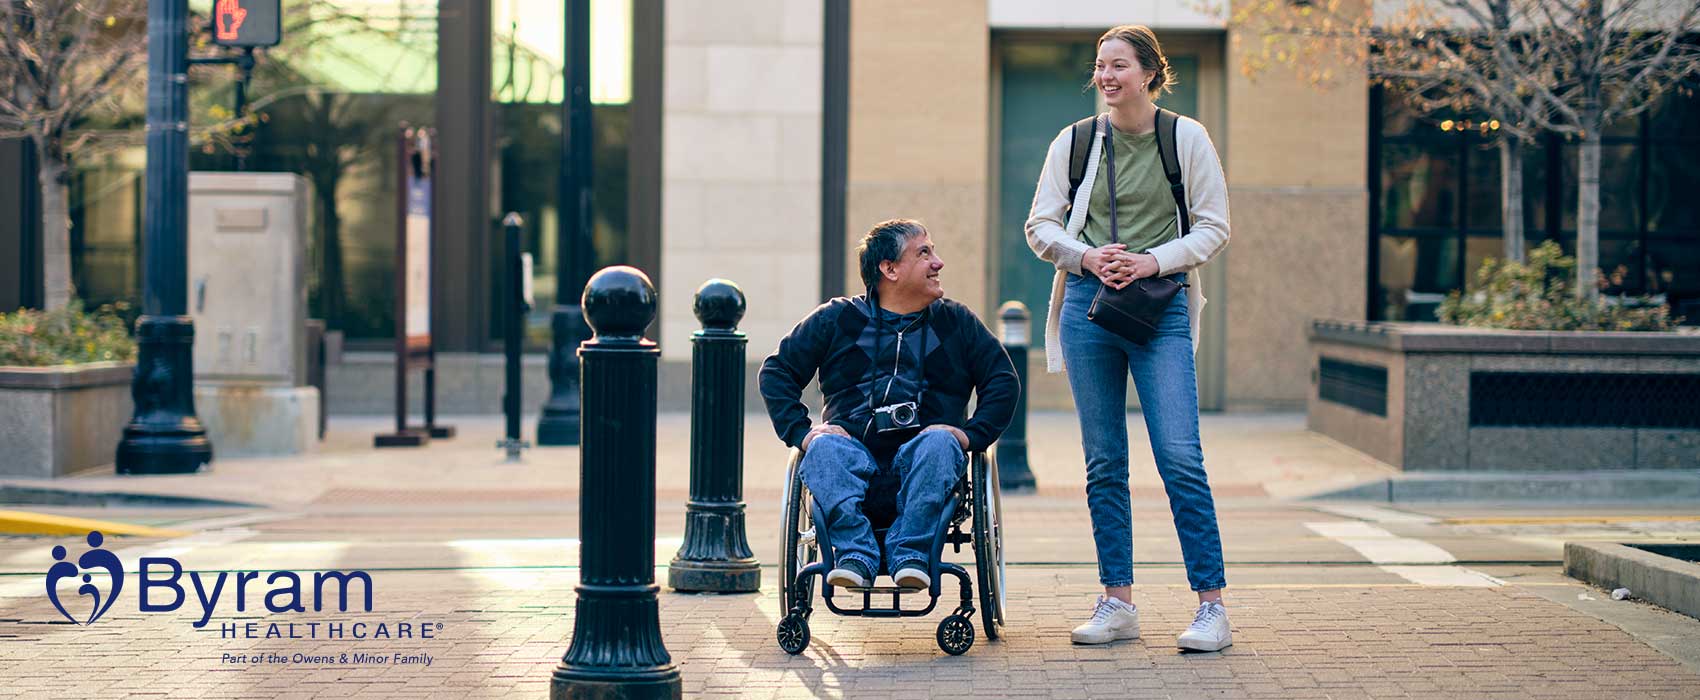 Woman walking with man in wheelchair.